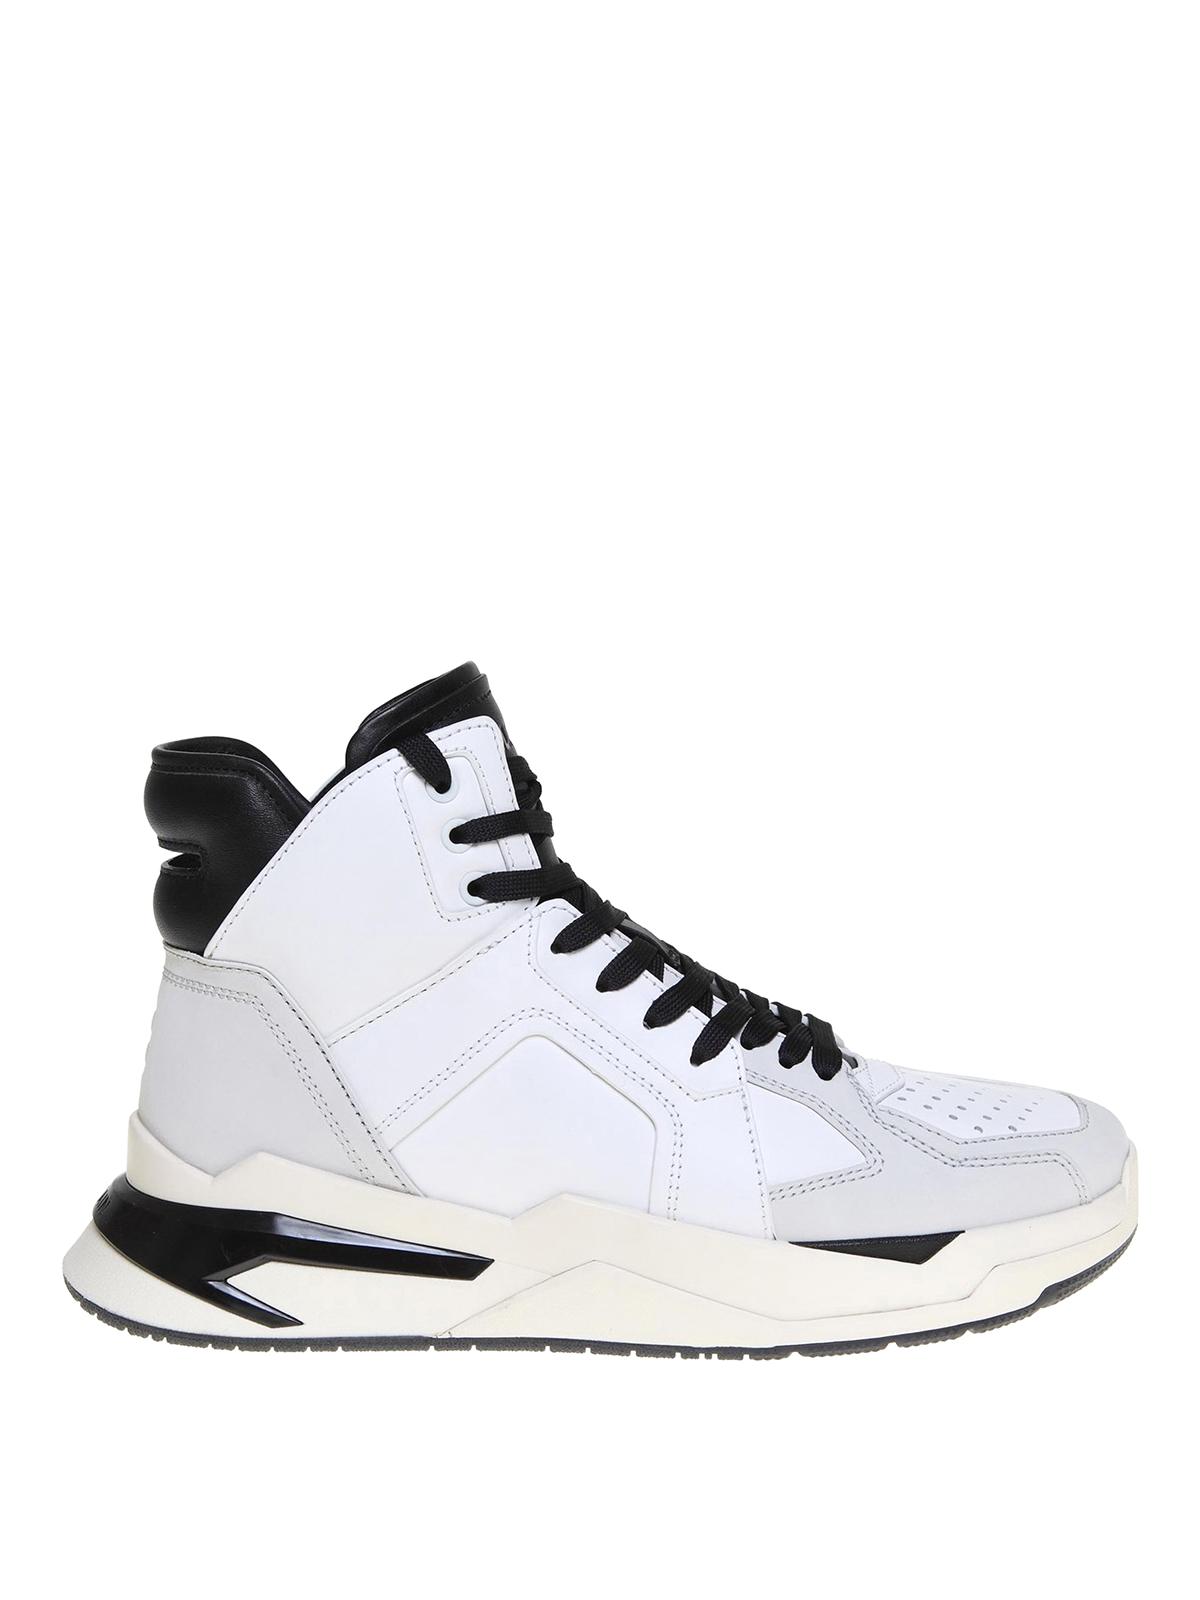 Balmain Leather B-ball Sneakers in White for Men - Lyst